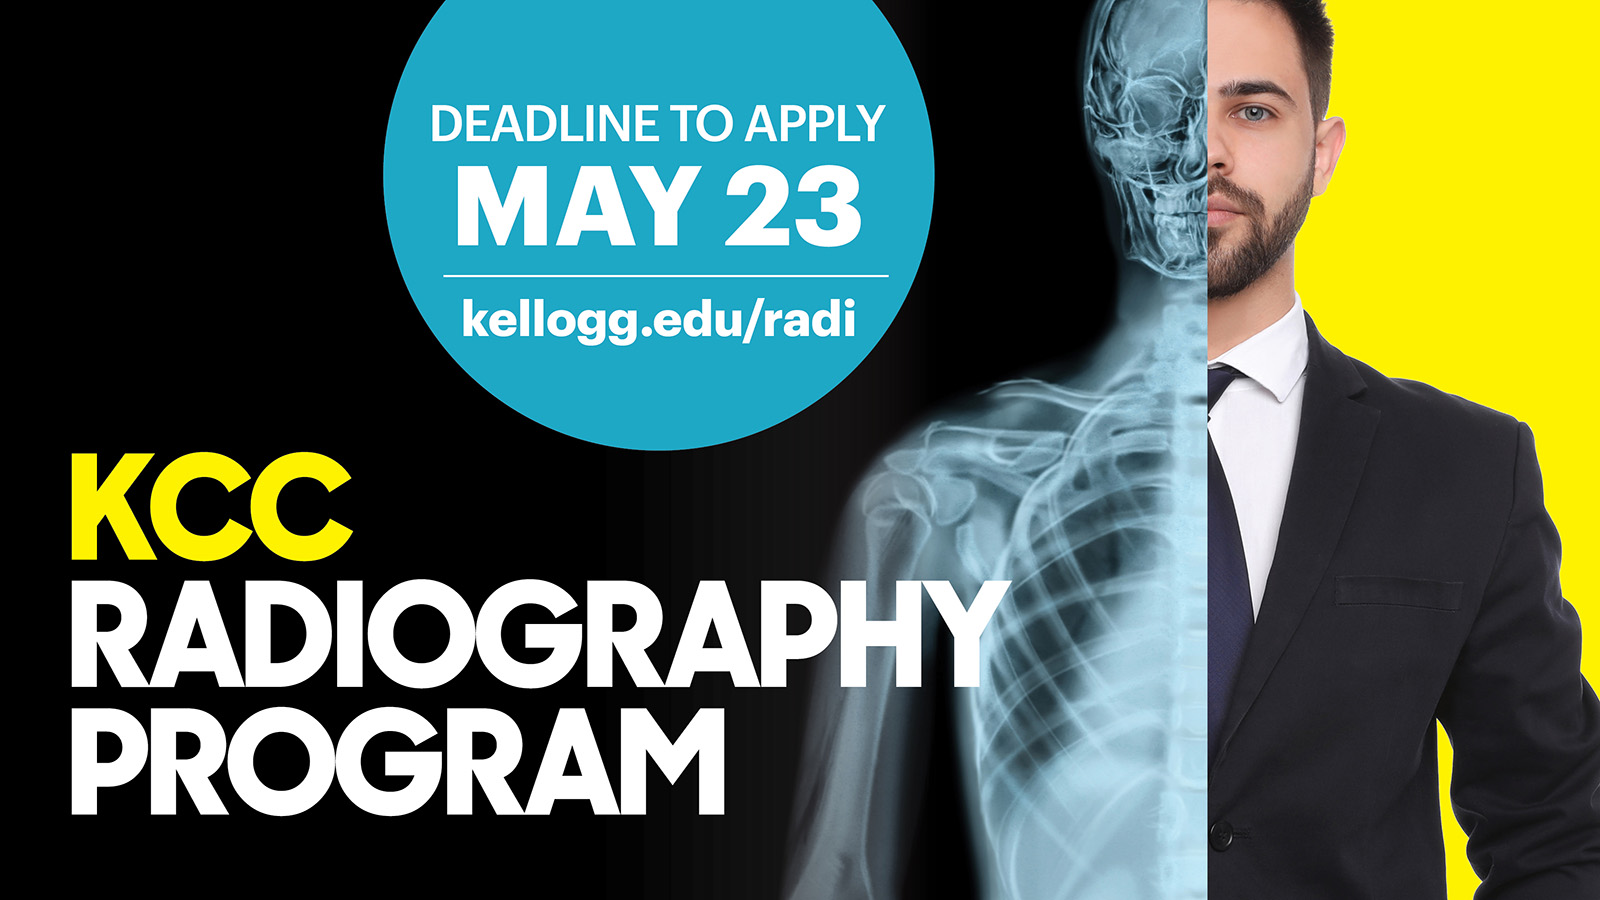 A graphic showing a person half X-rayed and text that reads, "KCC Radiography Program. Deadline to apply May 23. kellogg.edu/radi."